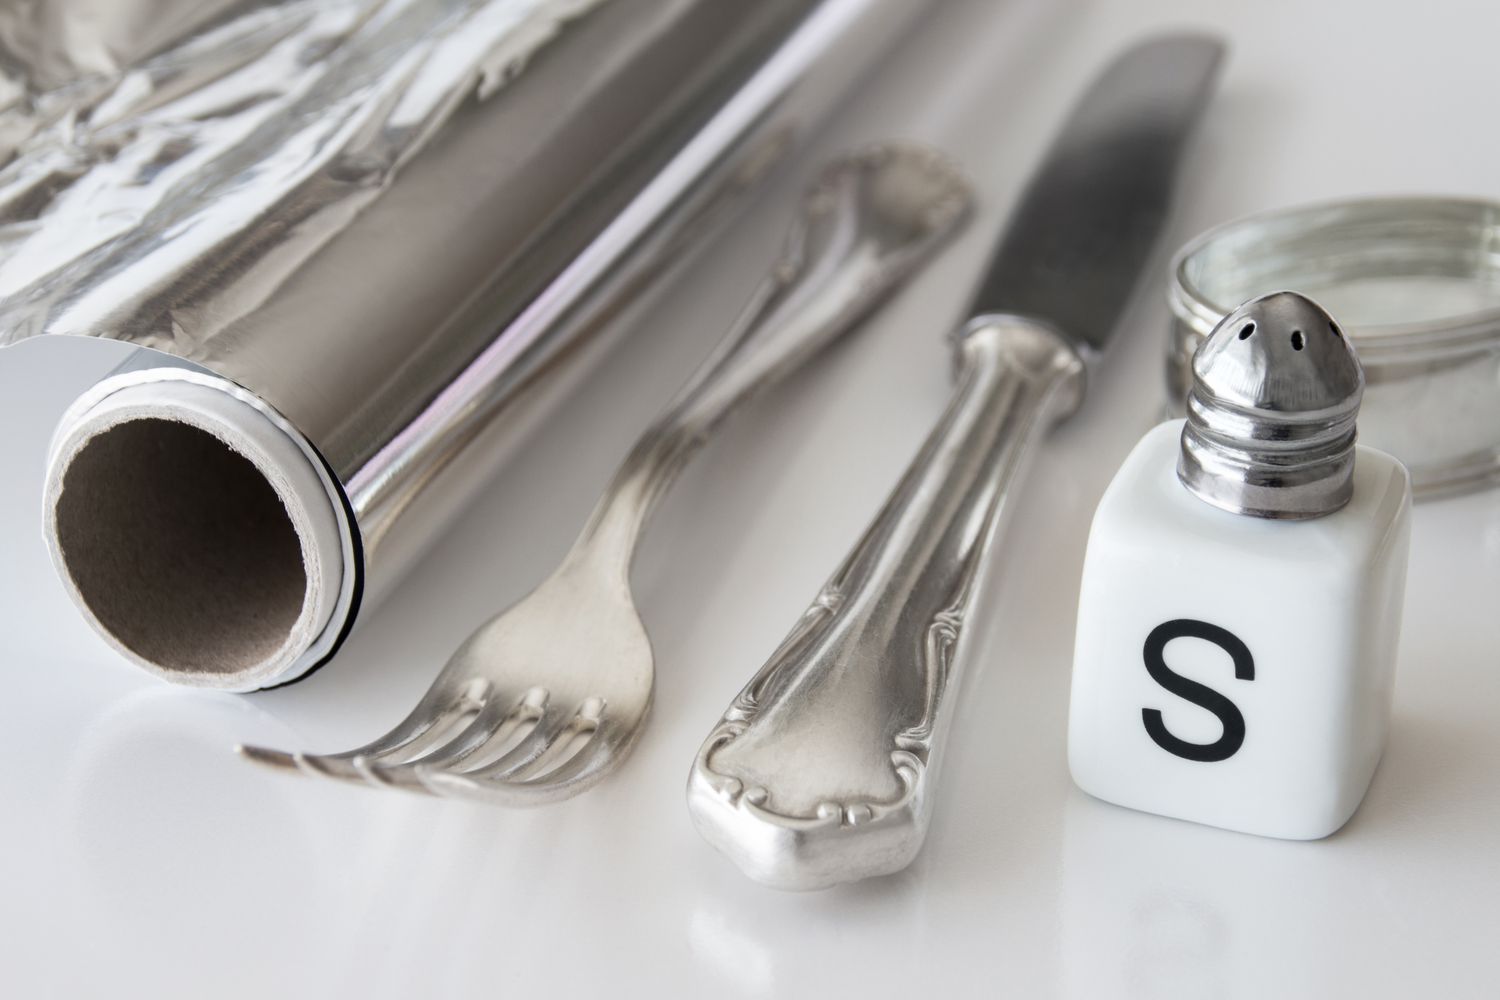 How To Clean Silverware With Baking Soda And Aluminum Foil